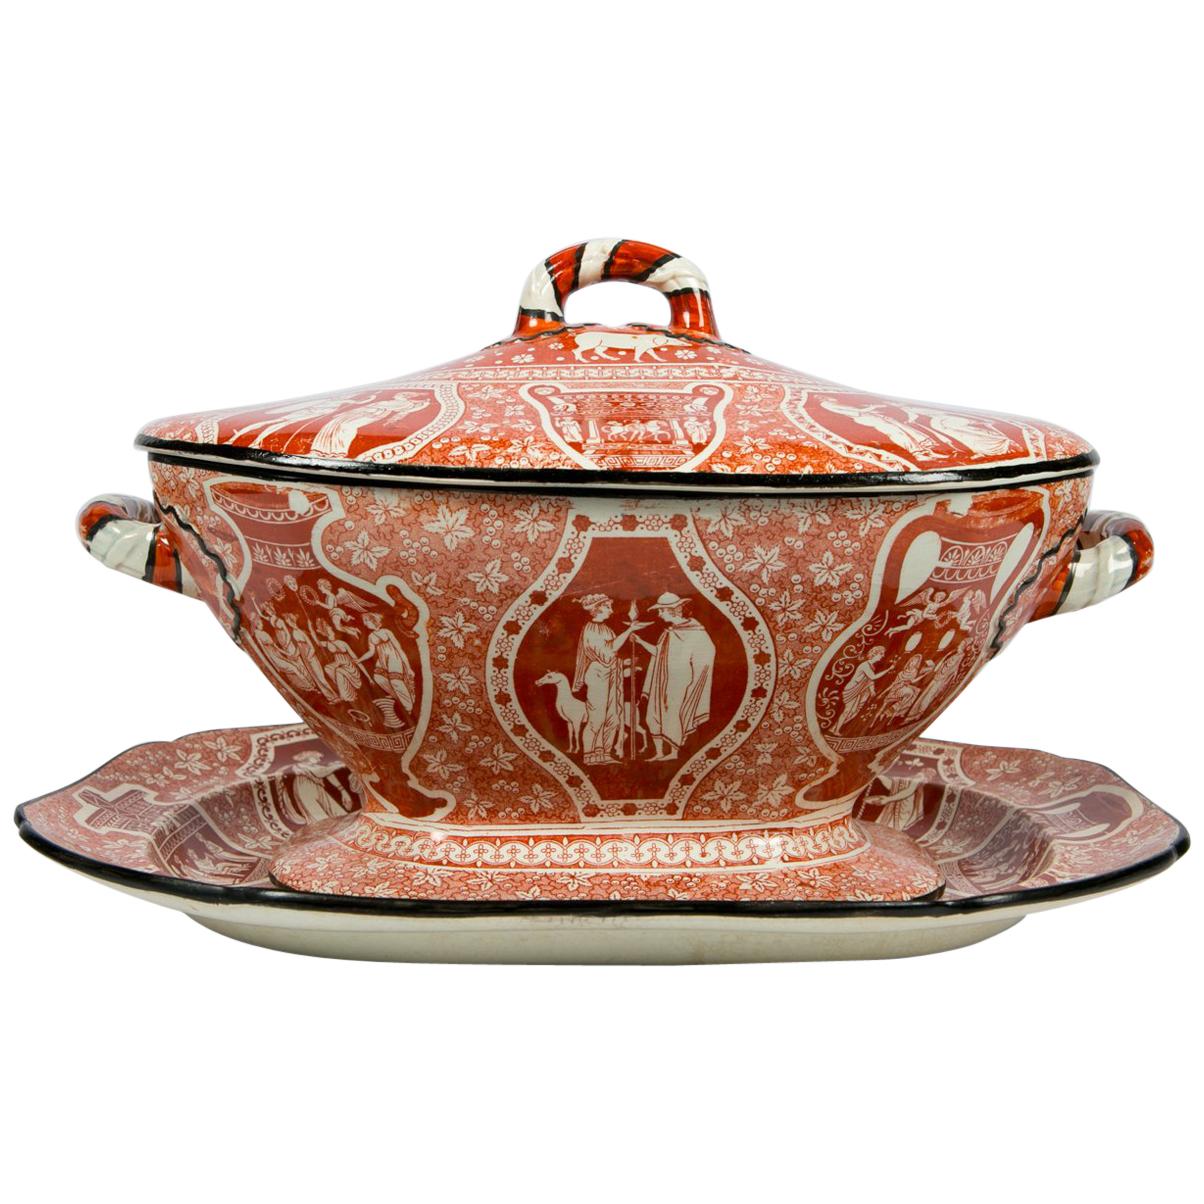 Antique Red Greek Ware Soup Tureen Decorated with Classical Figures circa 1810